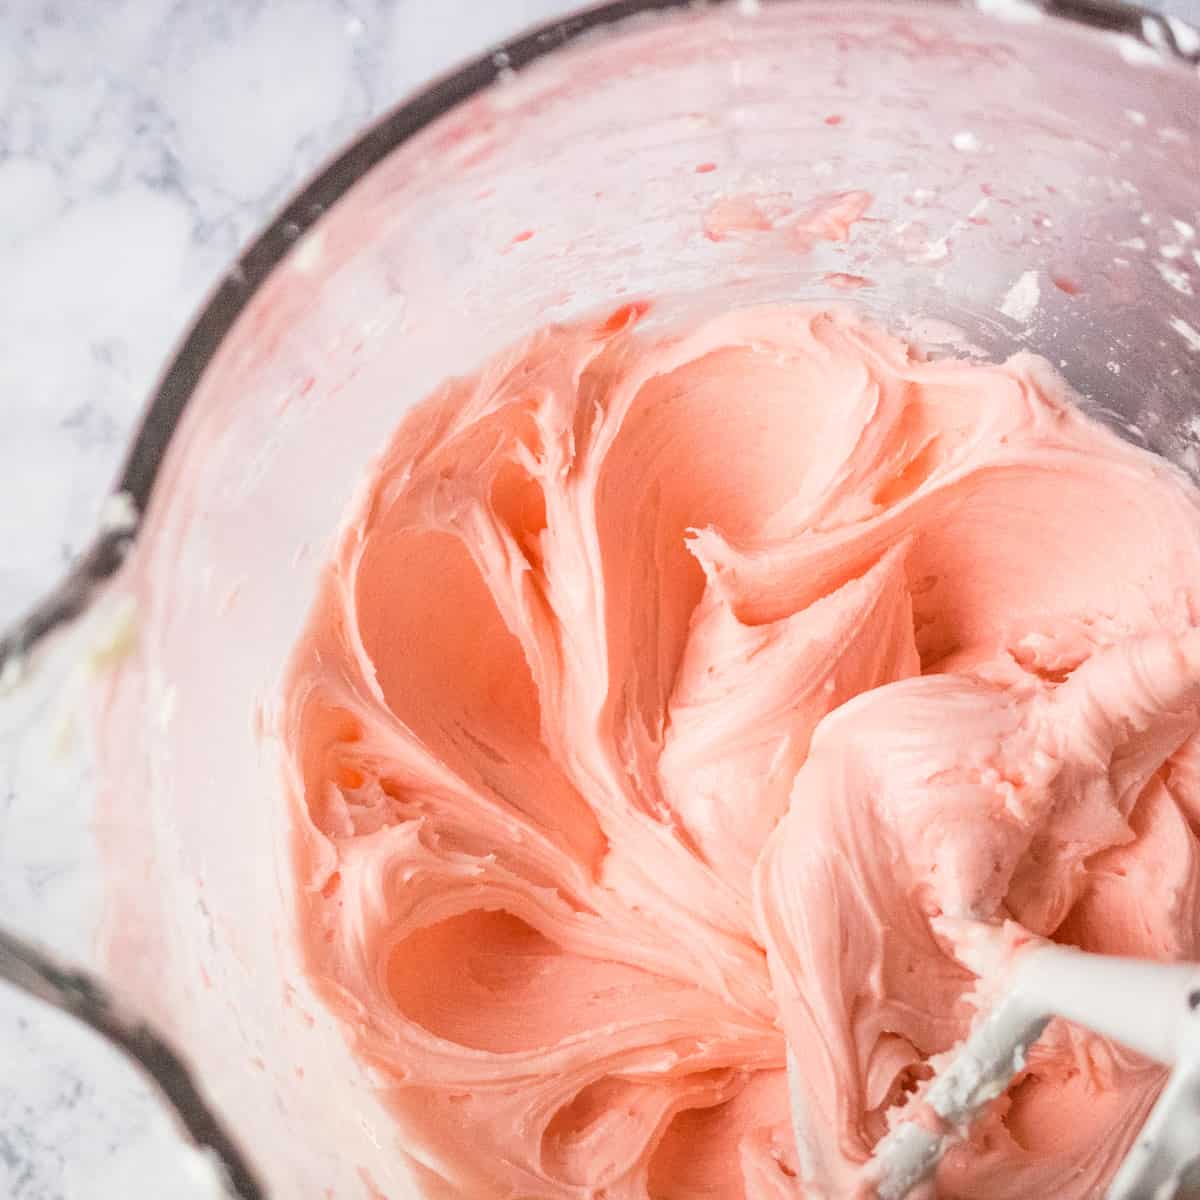 Glass mixing bowl of cherry buttercream frosting being beaten until fluffy.